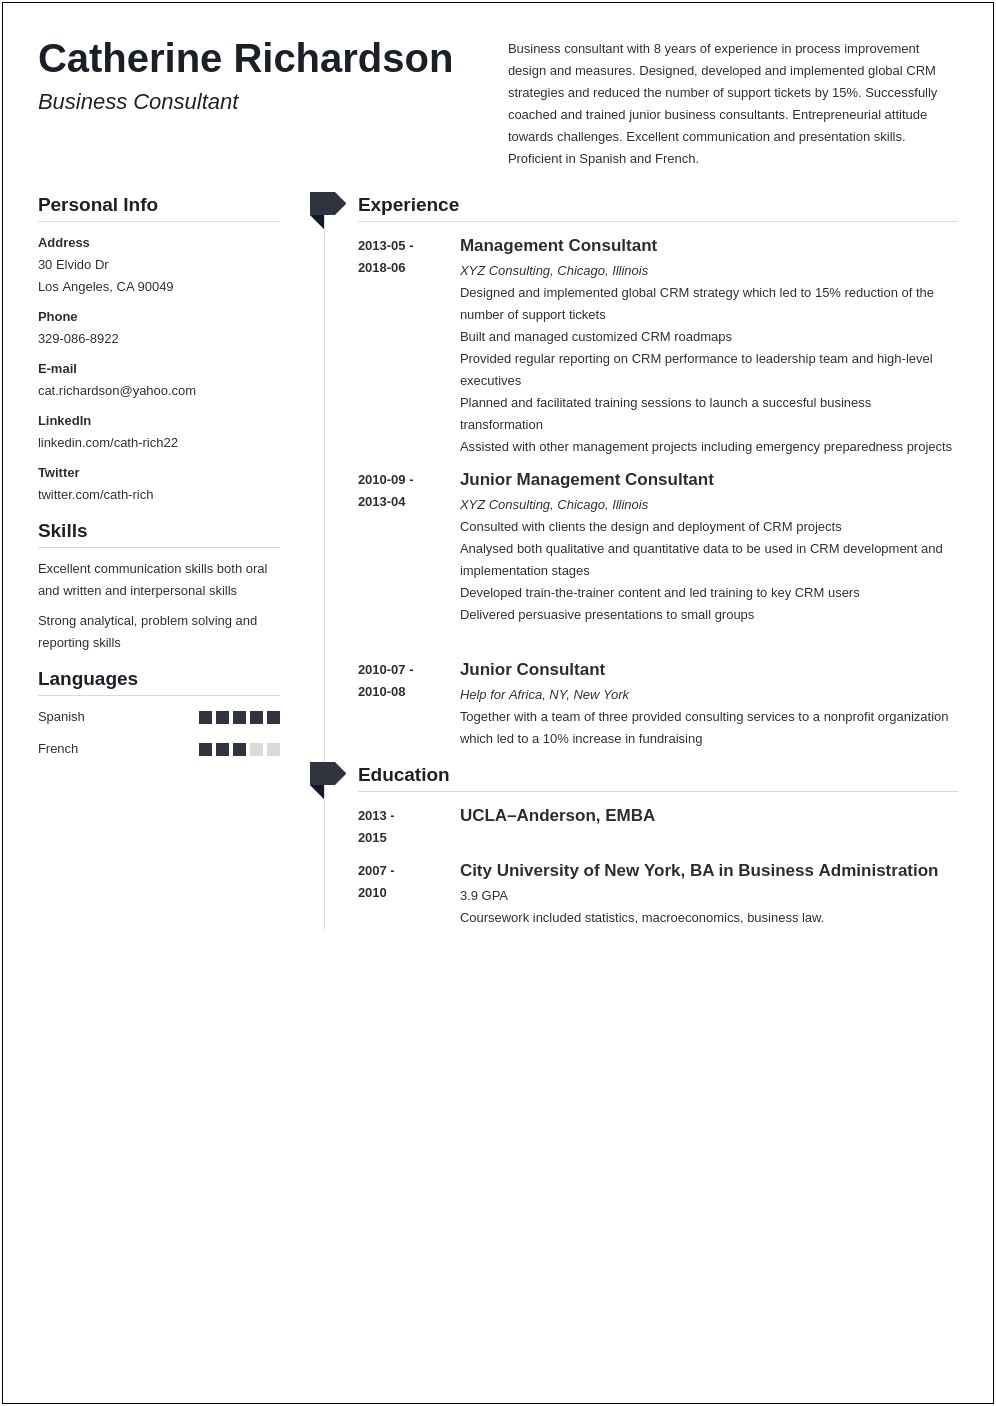 Big 4 Consulting Resume Examples